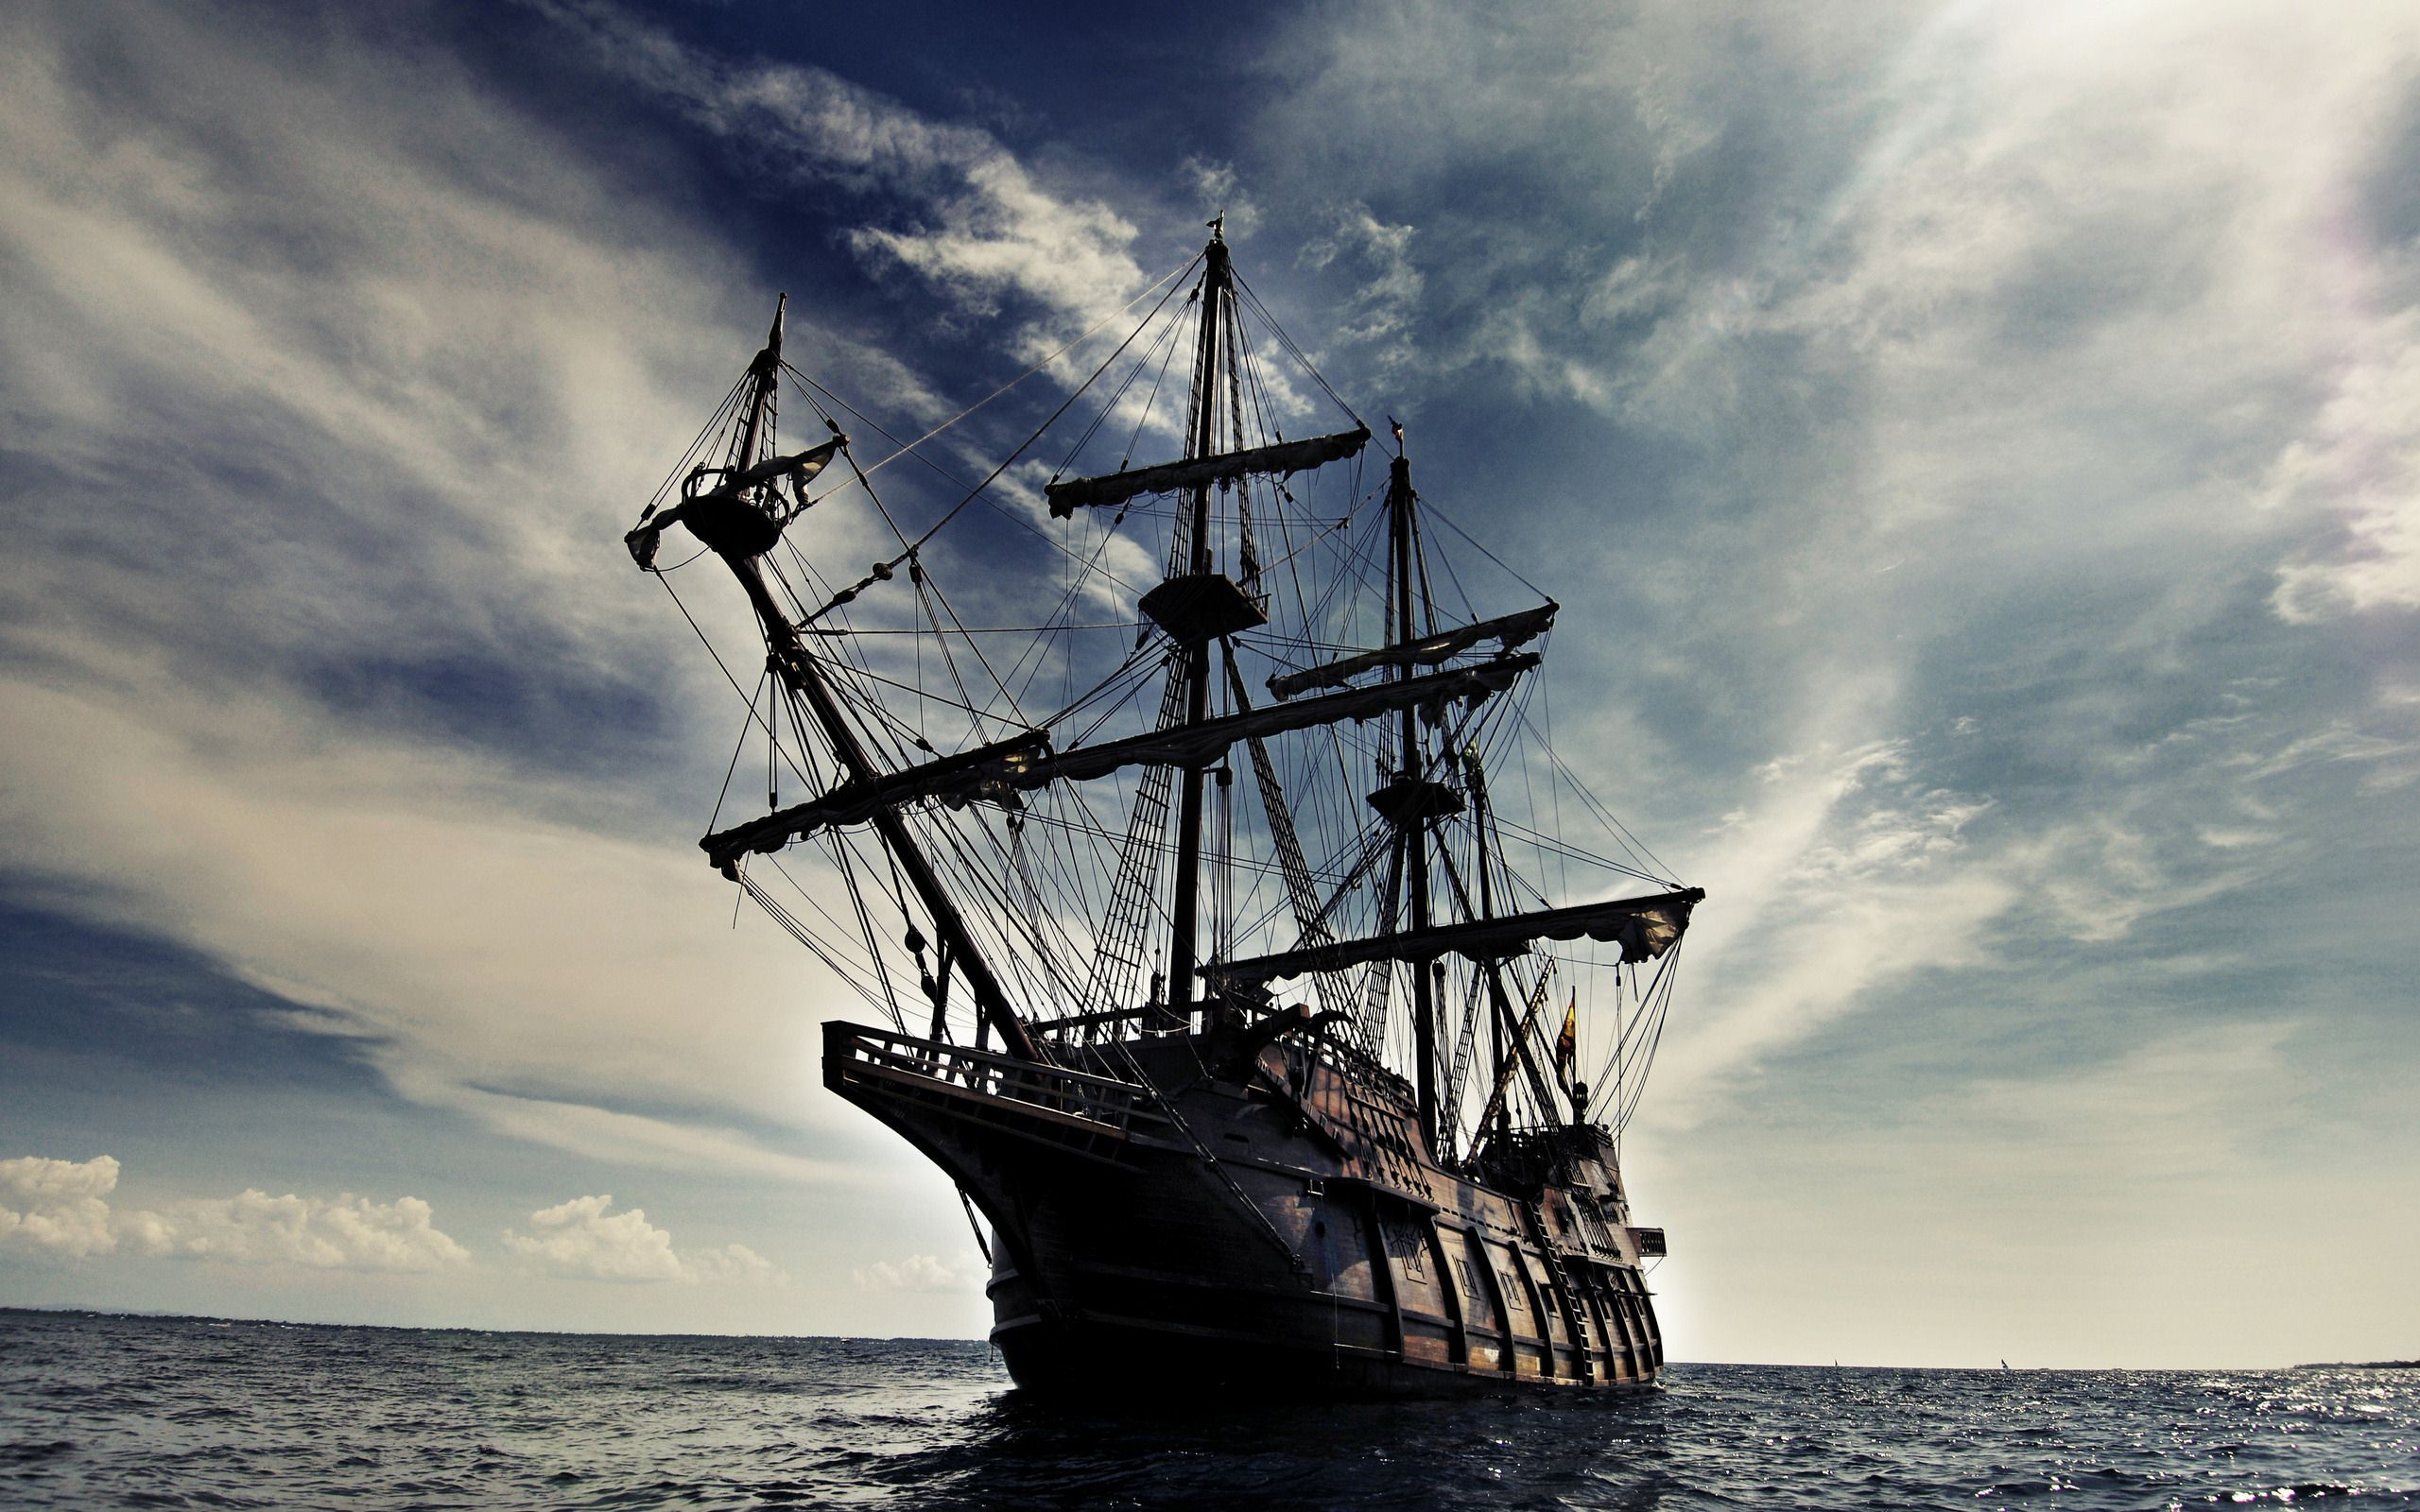 2560x1600 Pirates of the Caribbean Ship Wallpapers Top Free Pirates of the Caribbean Ship Backgrounds